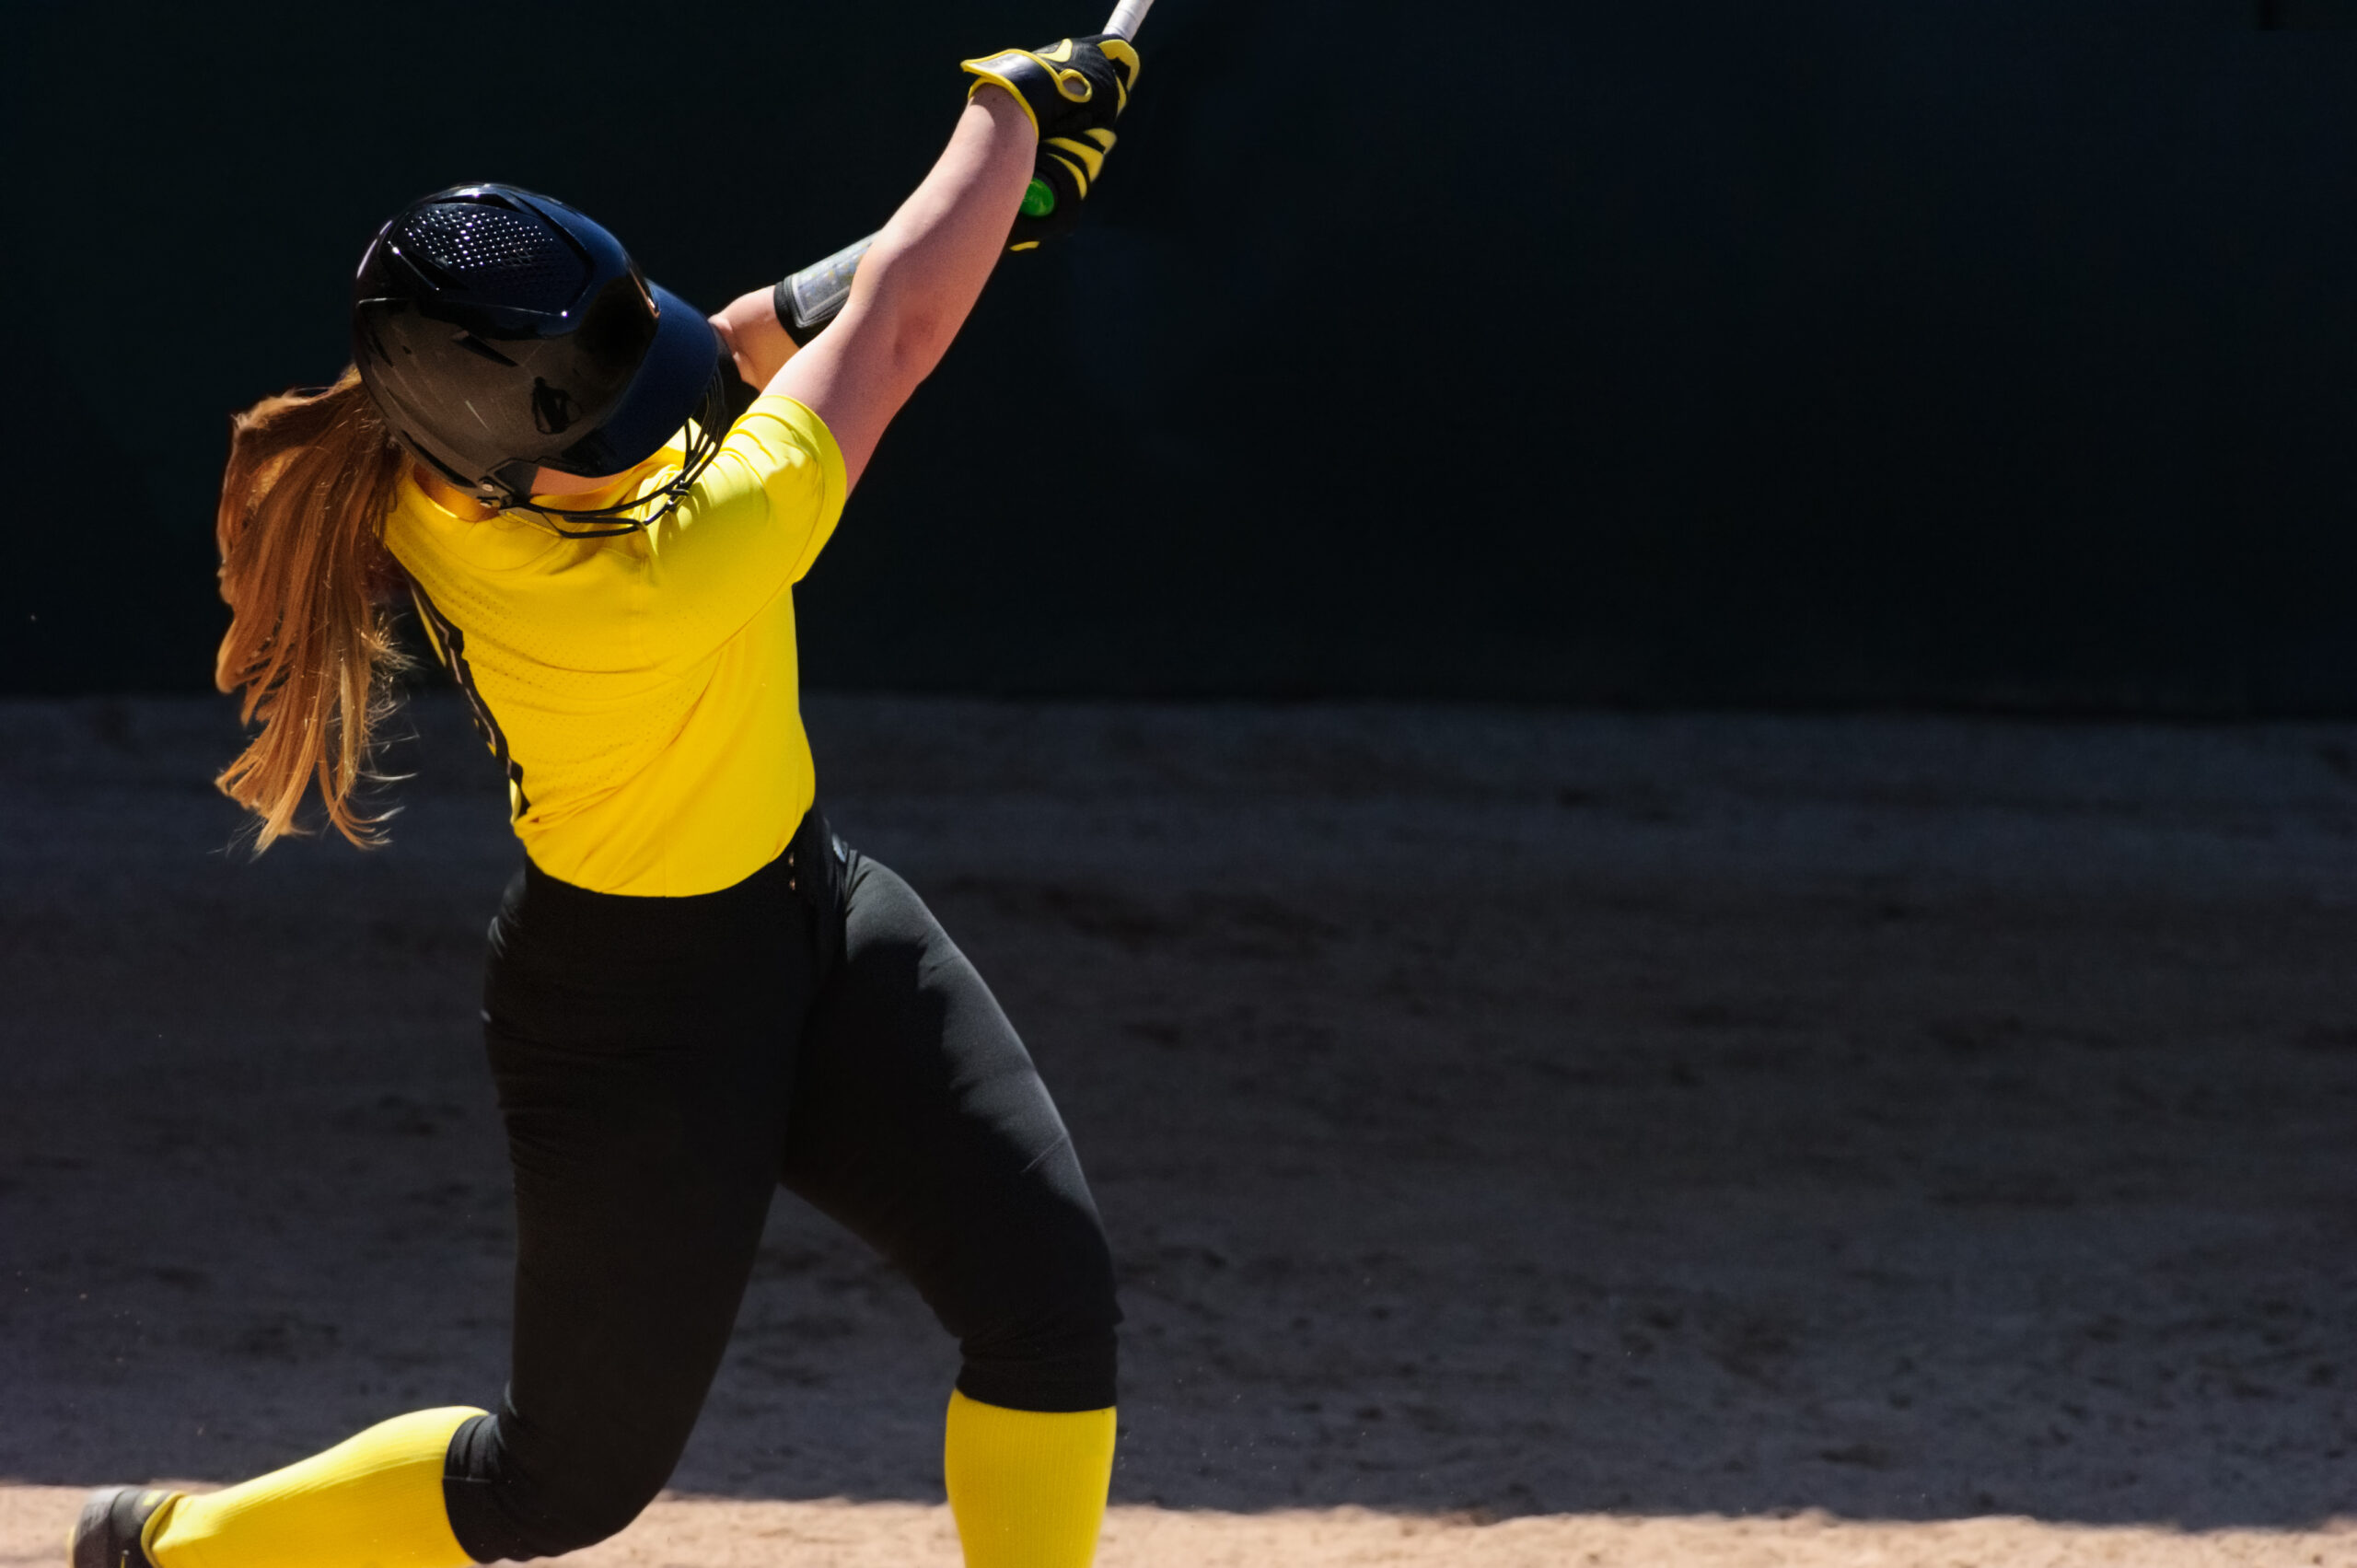  A NJCAA college softball player in a yellow jersey swings the bat while covered by the best catastrophic insurance. 